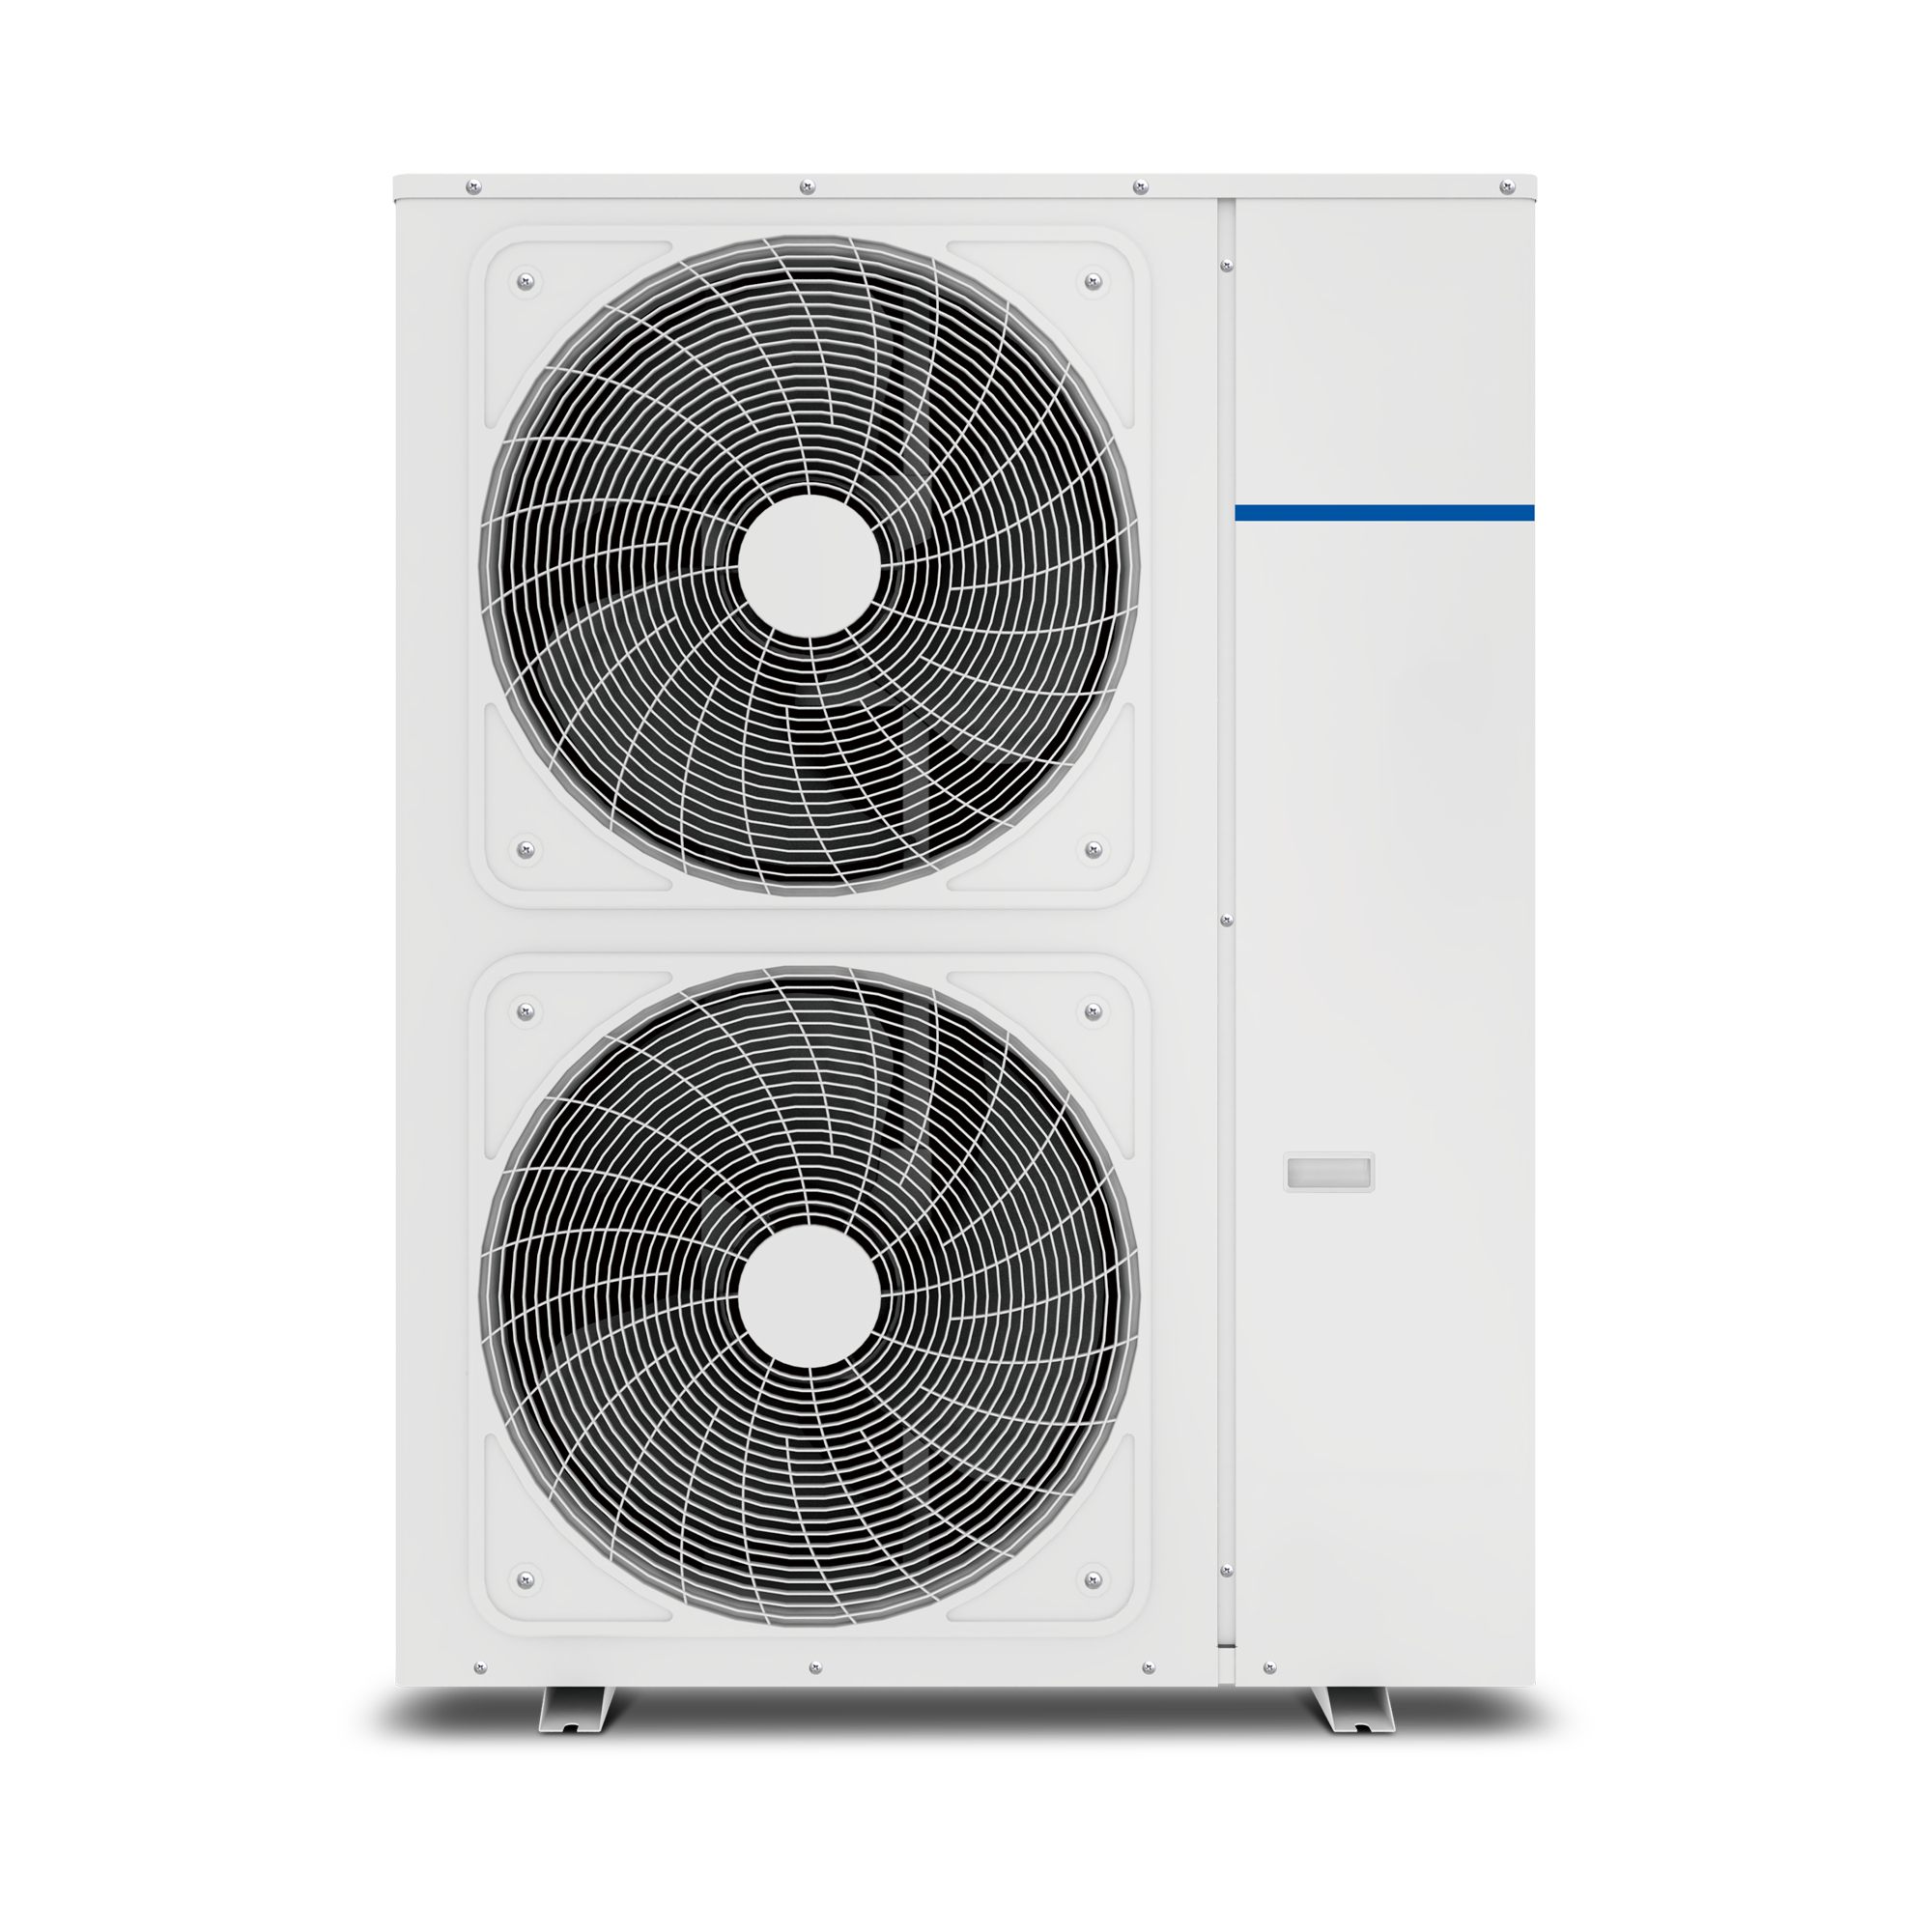 Wifi Monoblock Commercia Heating And Cooling Heat Pump